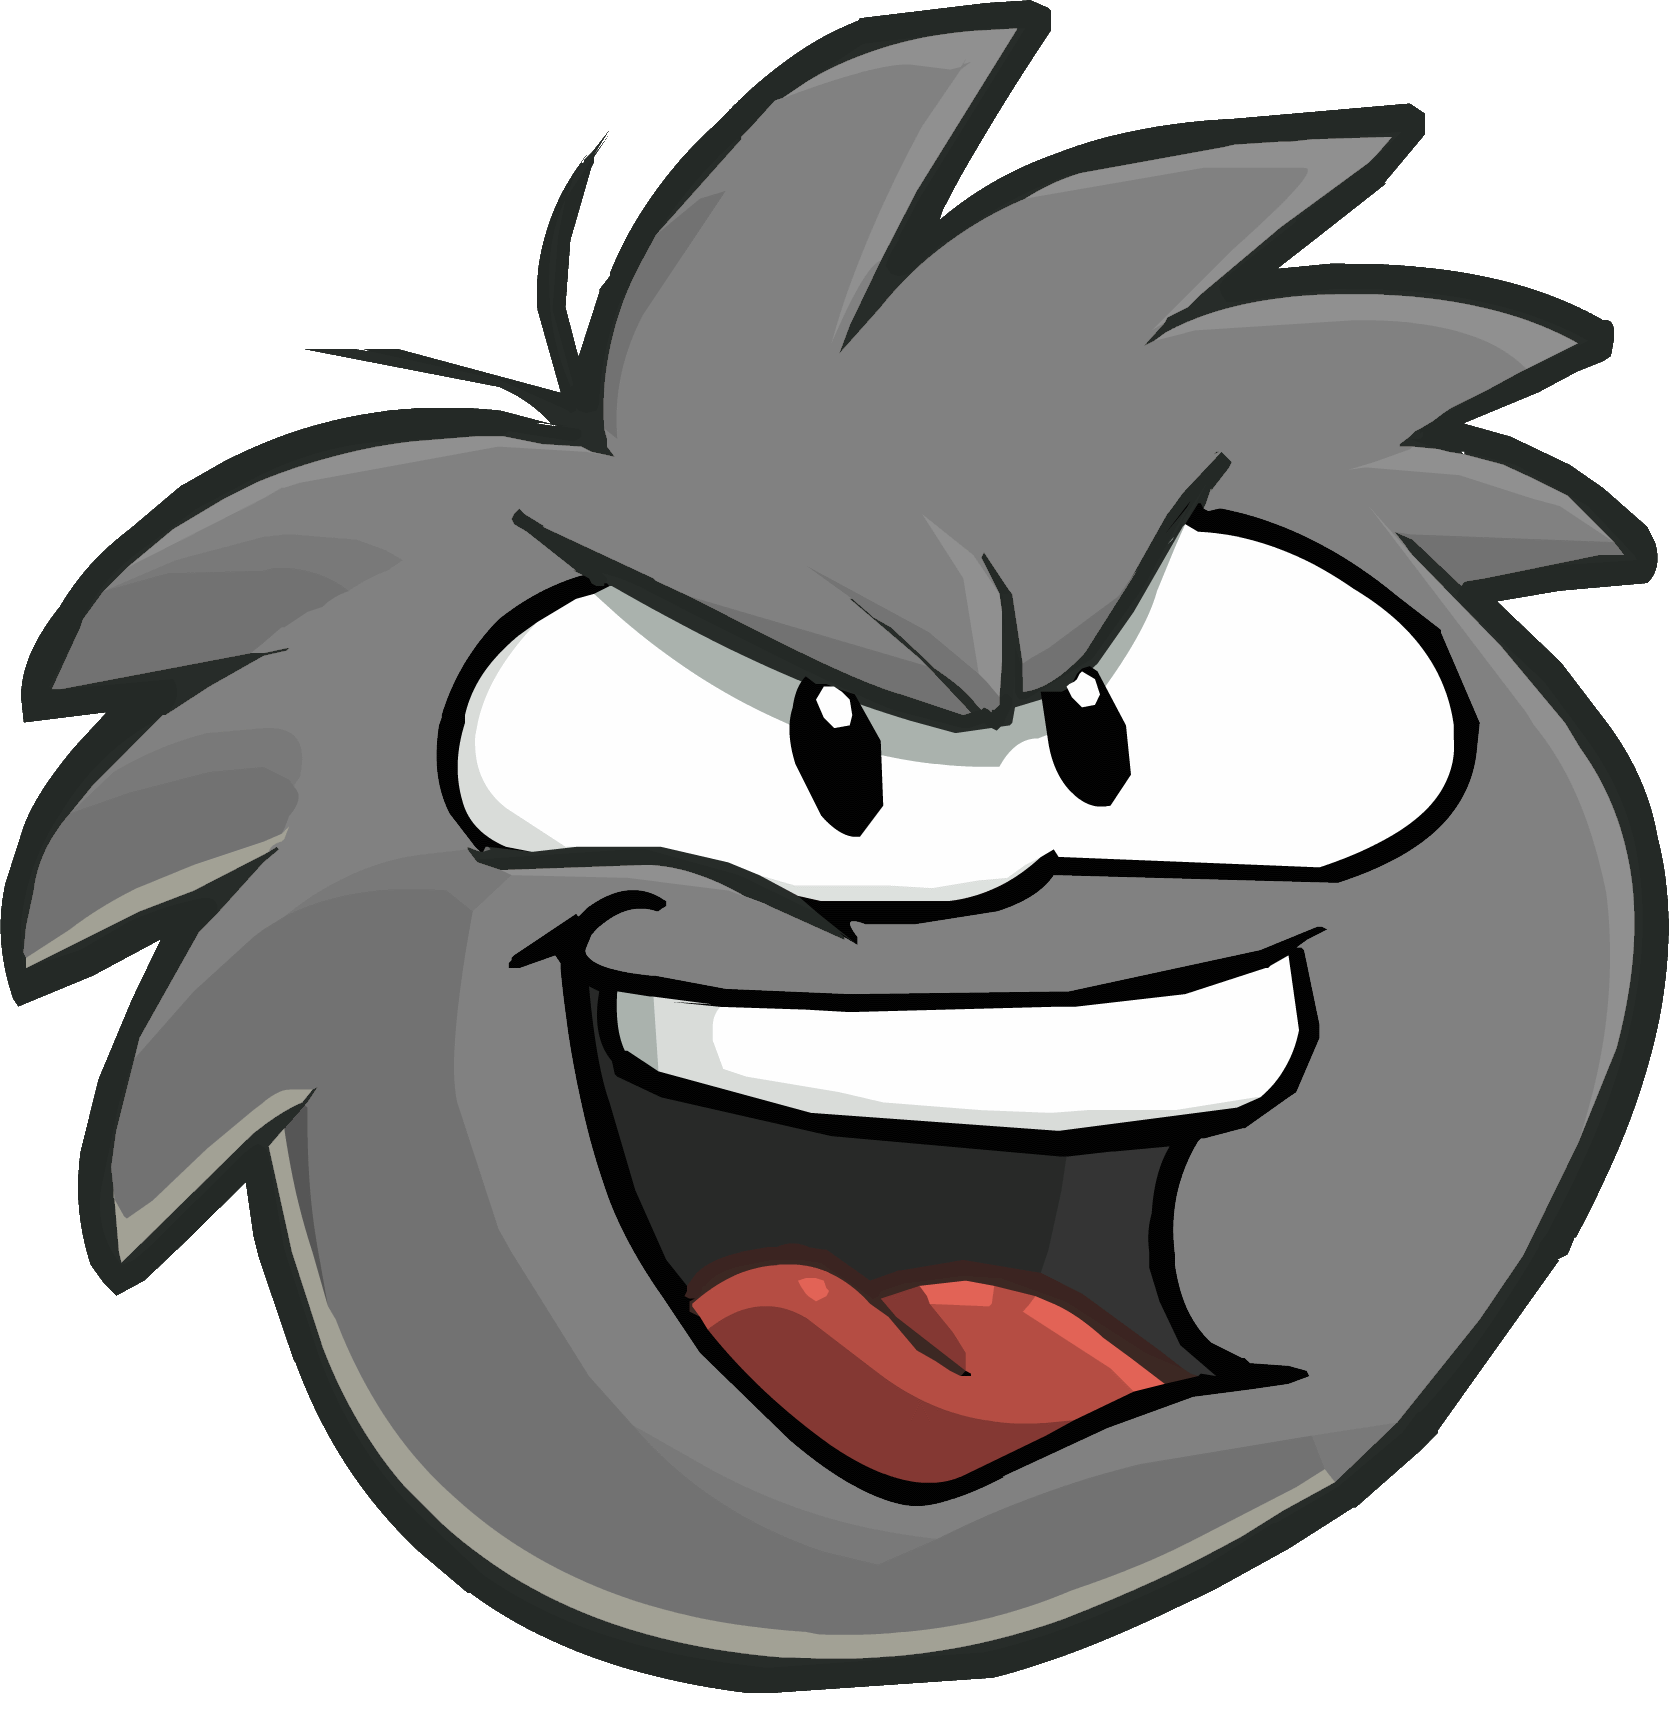 Walrus clipart grey thing. Image puffle art png